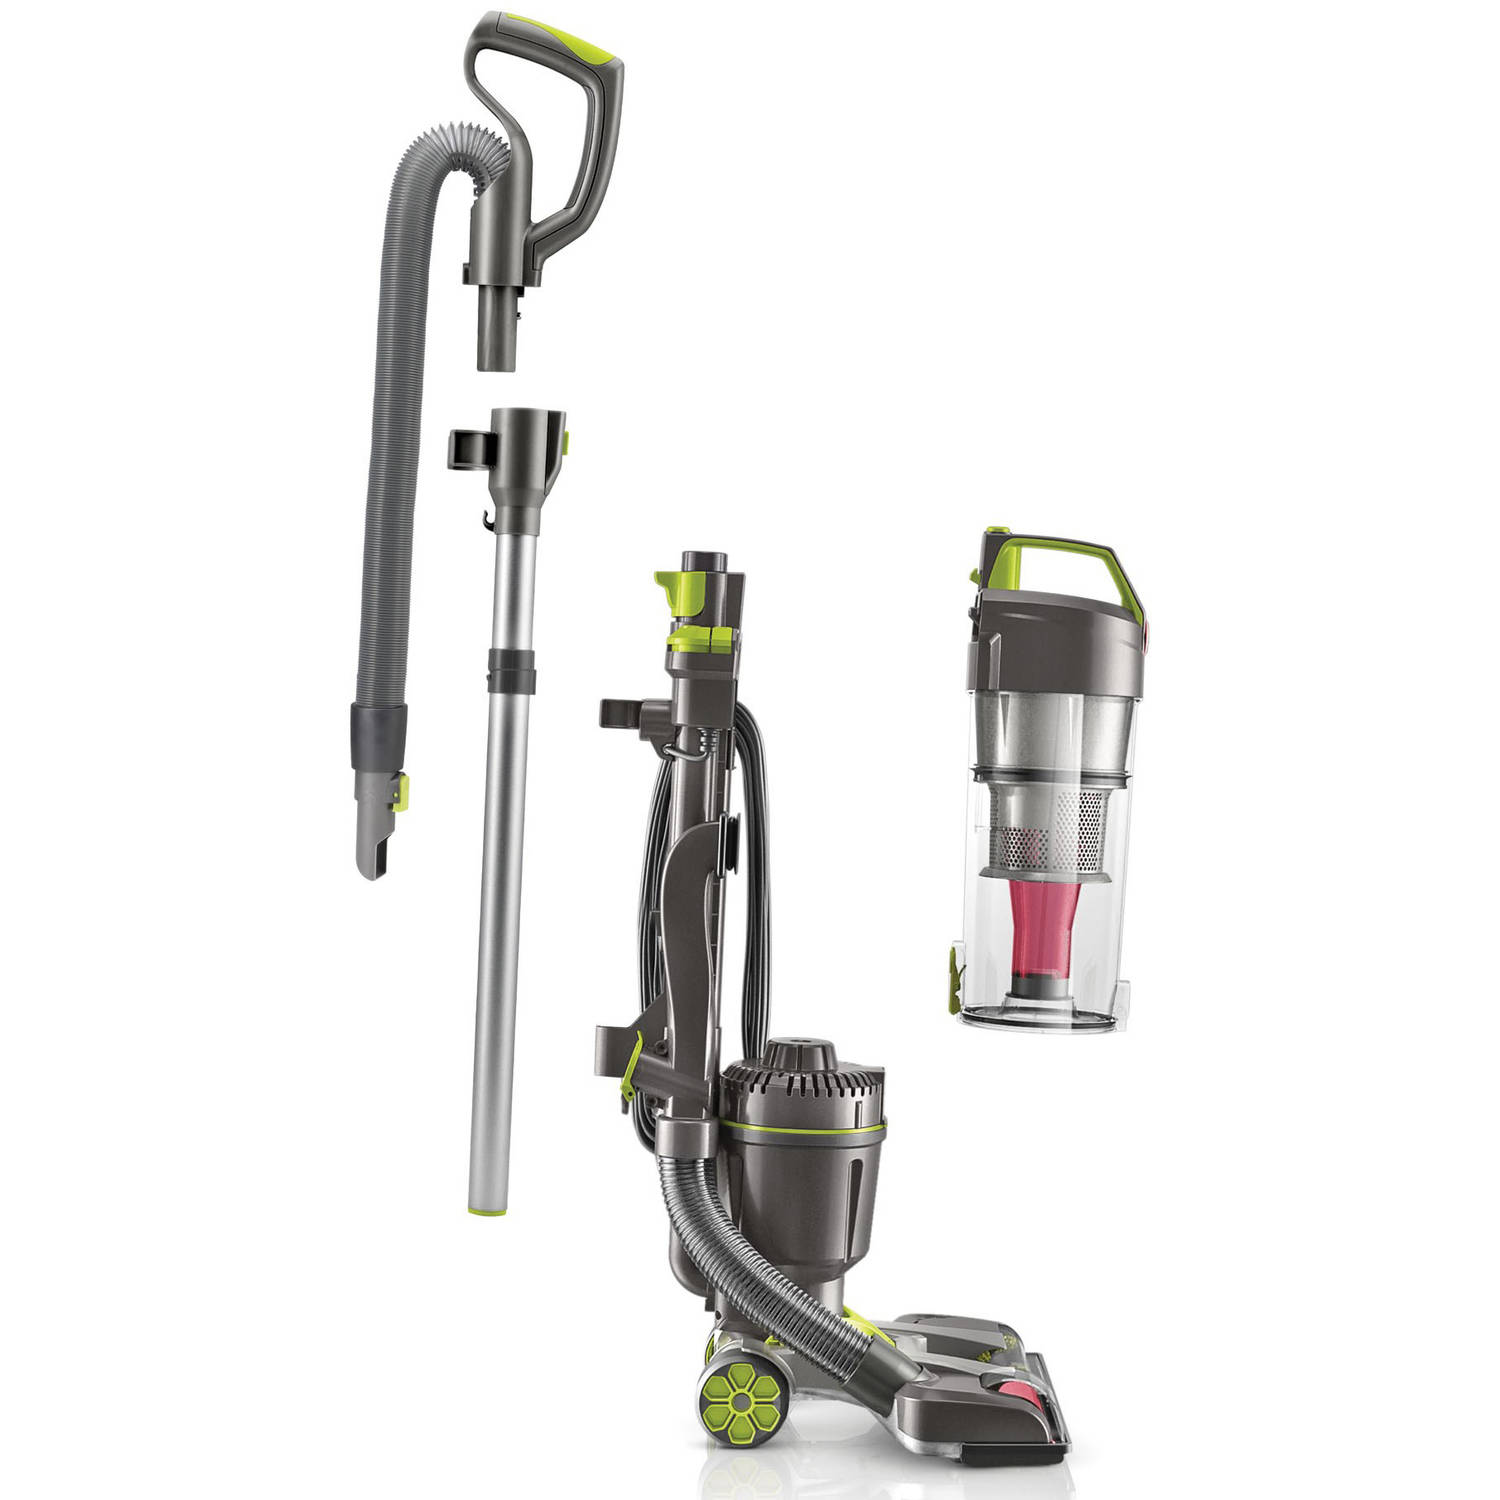 Hoover Wind Tunnel Air Steerable Pet Bagless Upright Vacuum Cleaner, UH72405PC - image 2 of 13